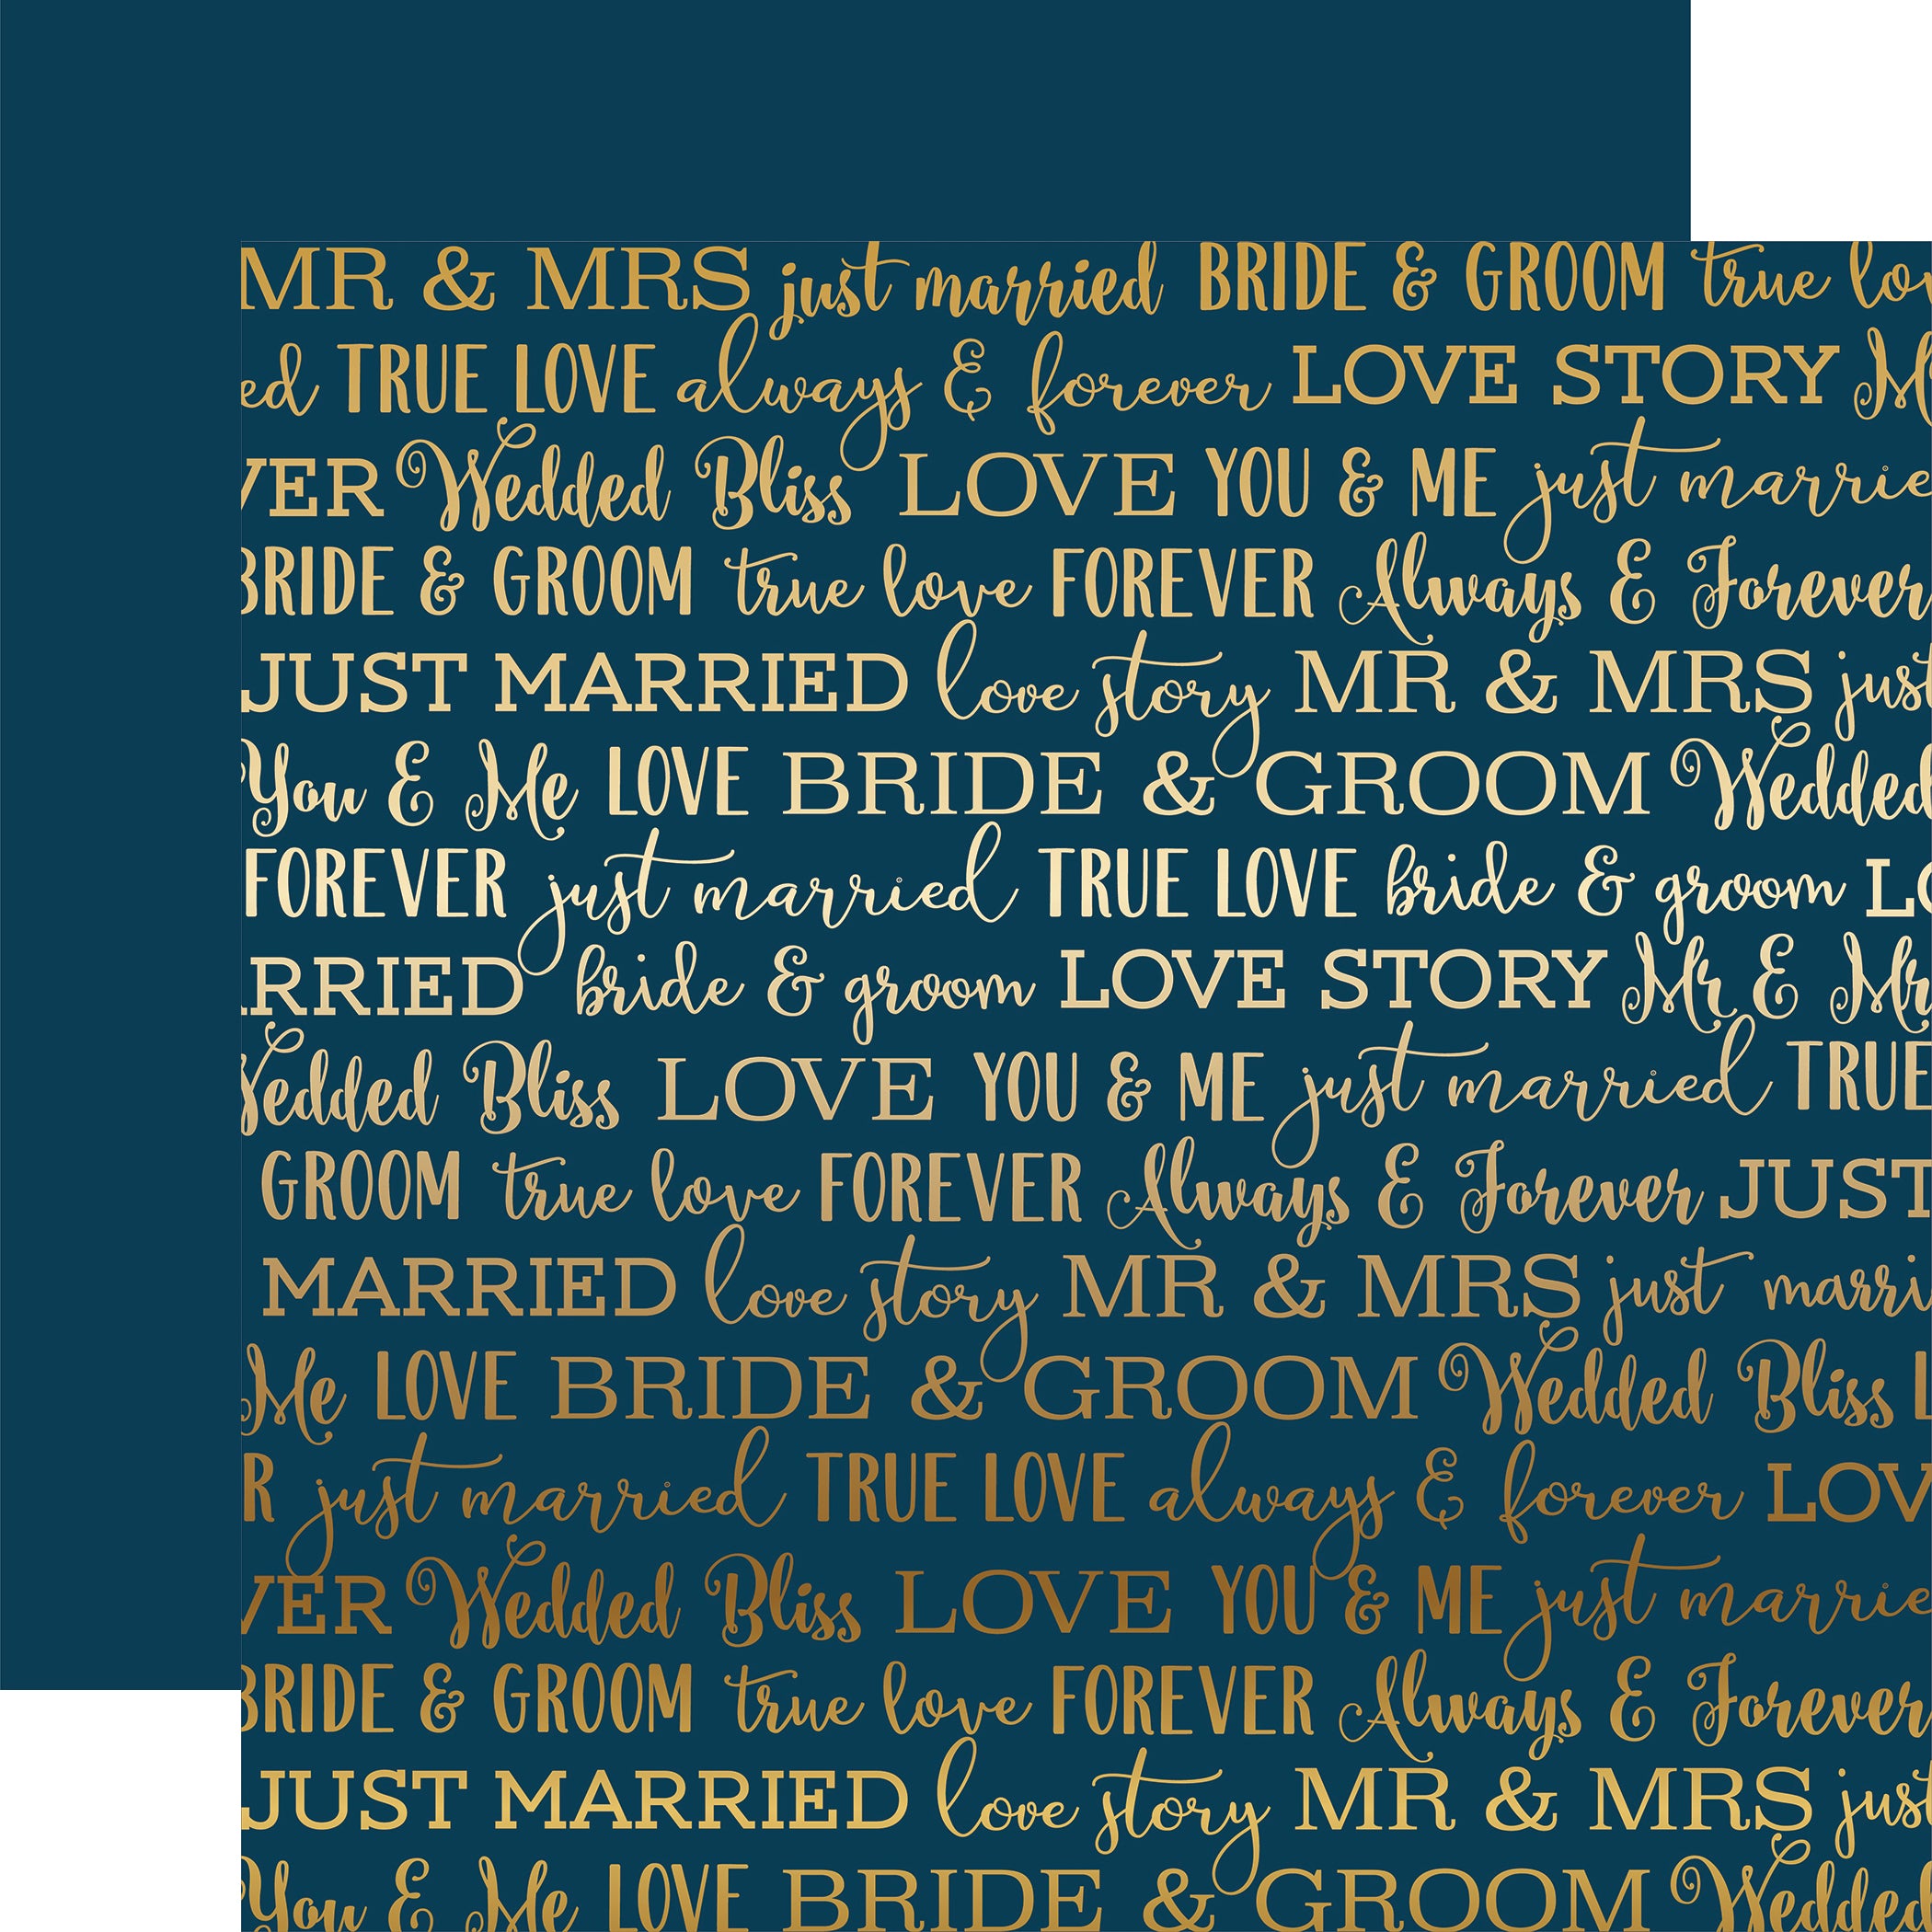 Love Story Collection Blue Love Story 12 x 12 Gold Foiled Scrapbook Paper by Carta Bella